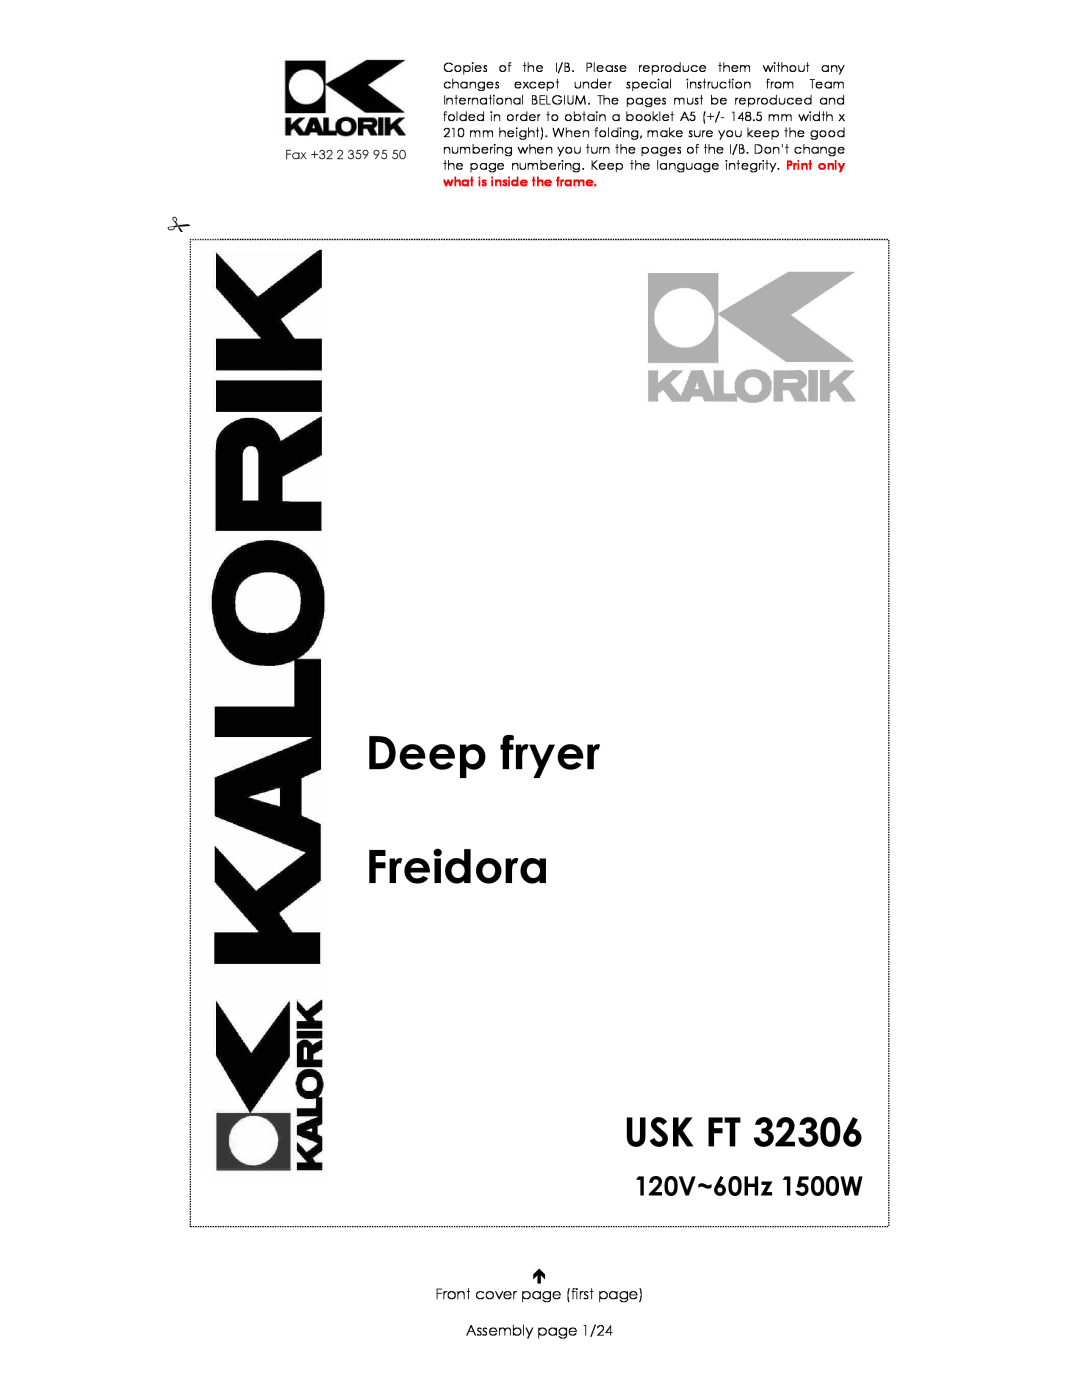 Kalorik USK FT 32306 manual Usk Ft, 120V~60Hz 1500W, Deep fryer Freidora, Front cover page first page Assembly page 1/24 